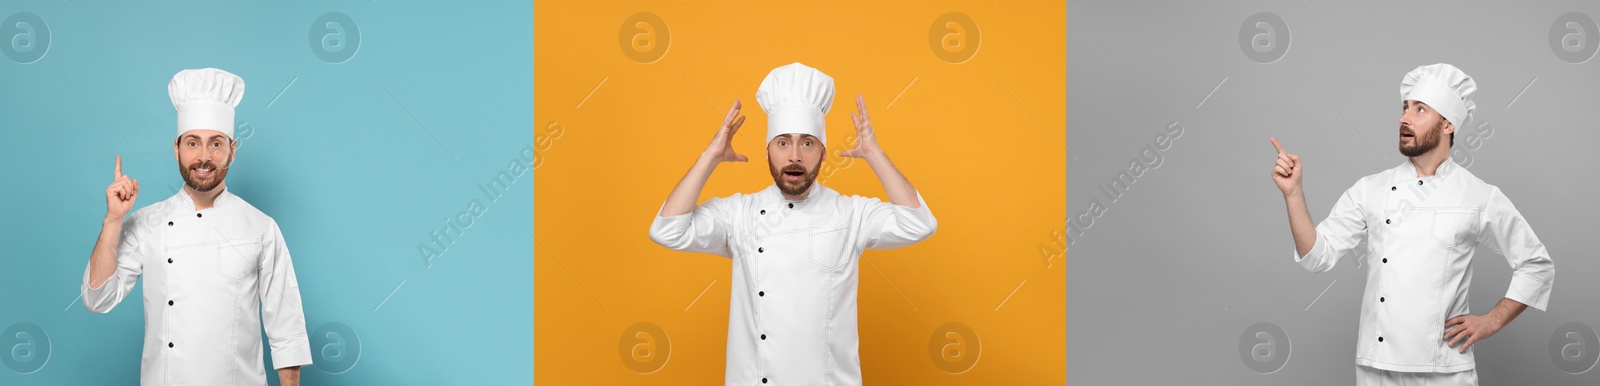 Image of Chef in uniform on different color backgrounds, collage design